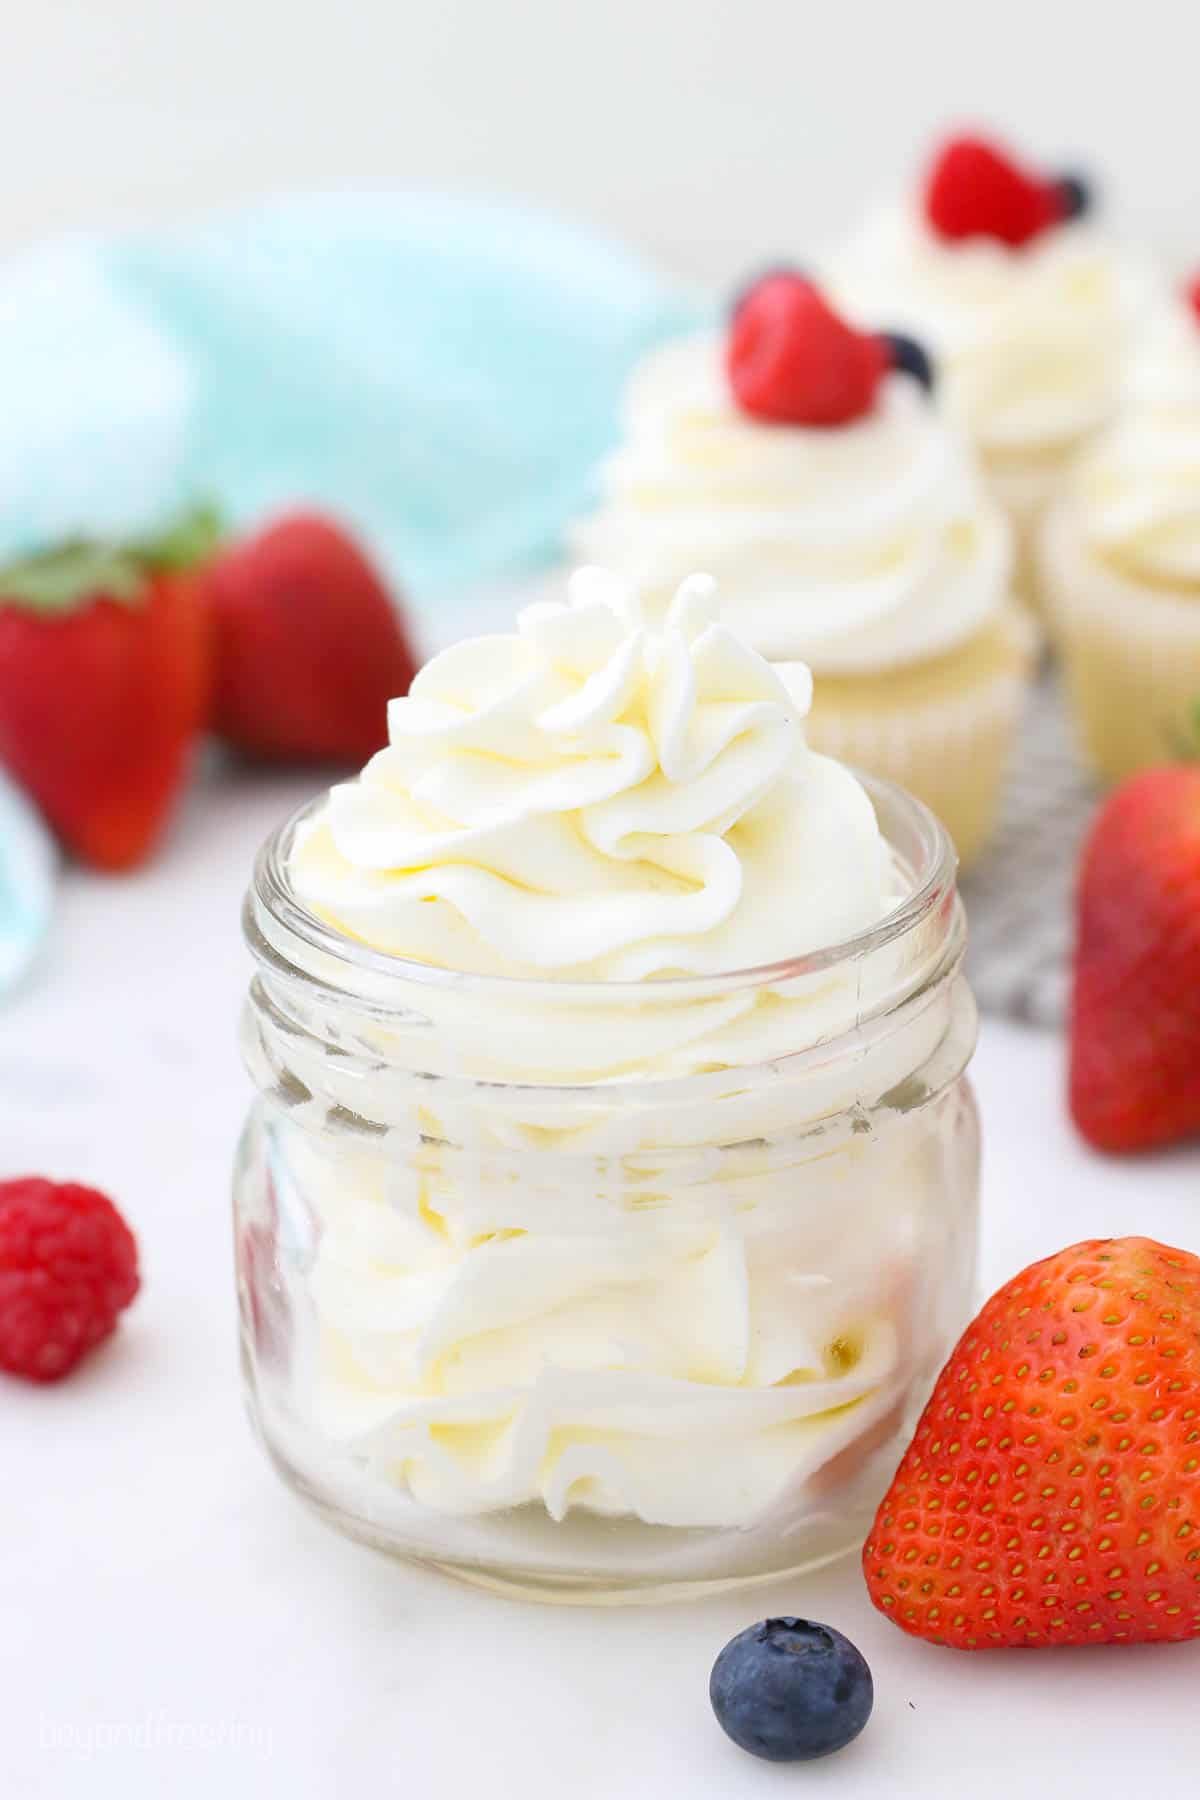 A small glass jar filled with beautifully piped frosting. The jar is surrounded by berries